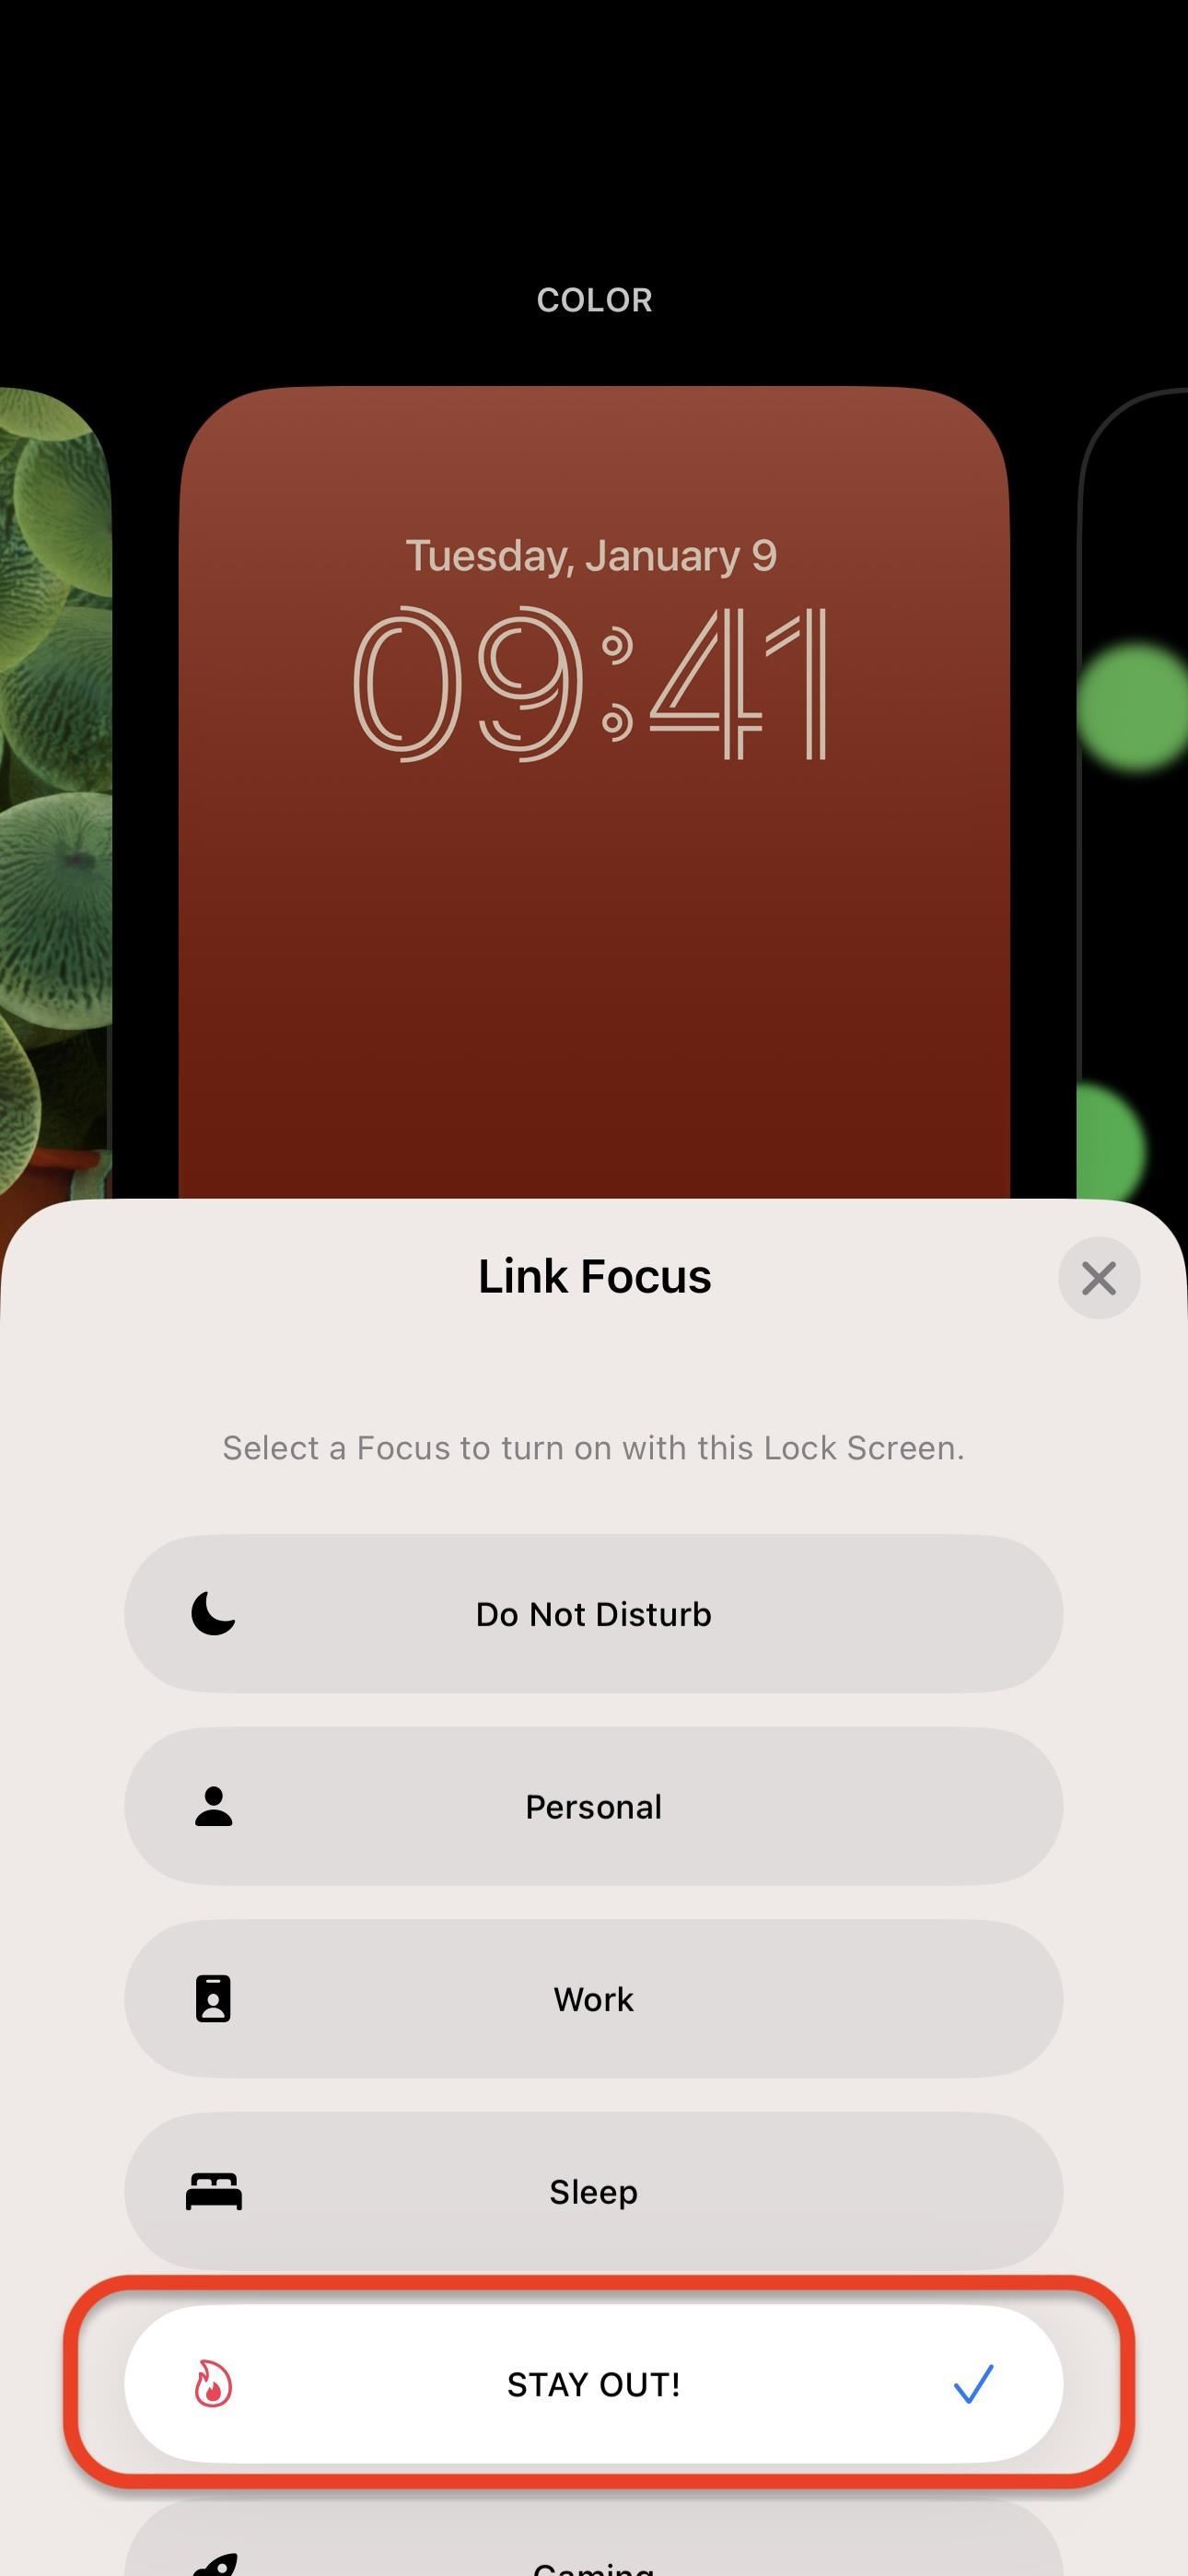 Update Your iPhone's Lock Screen with an Attention-Grabbing Note, Reminder, Warning, or Other Custom Message